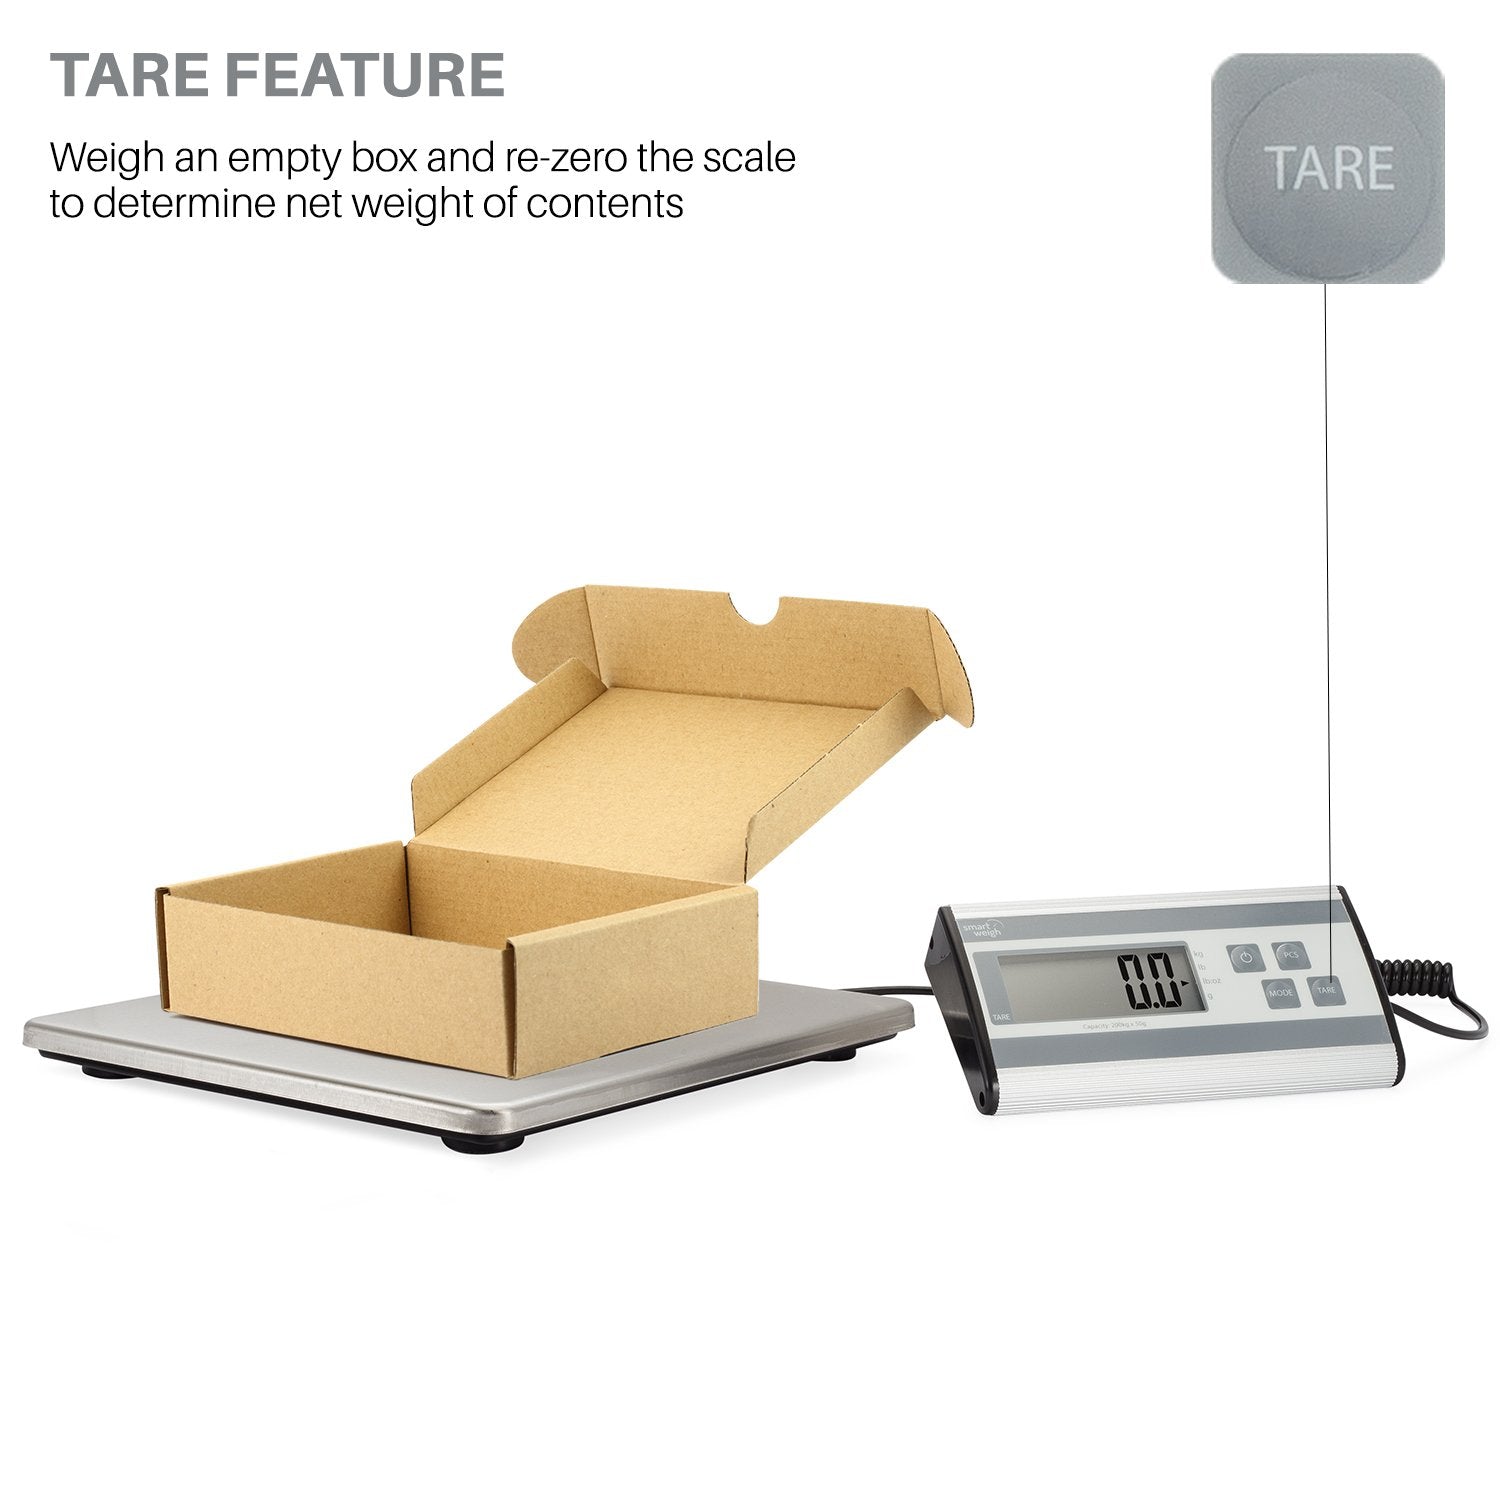 Smart Weigh 440lbs x 6 oz. Digital Heavy Duty Shipping and Postal Scale, with Durable Stainless Steel Large Platform, UPS USPS Post Office Postal Scale and Luggage Scale  - Acceptable